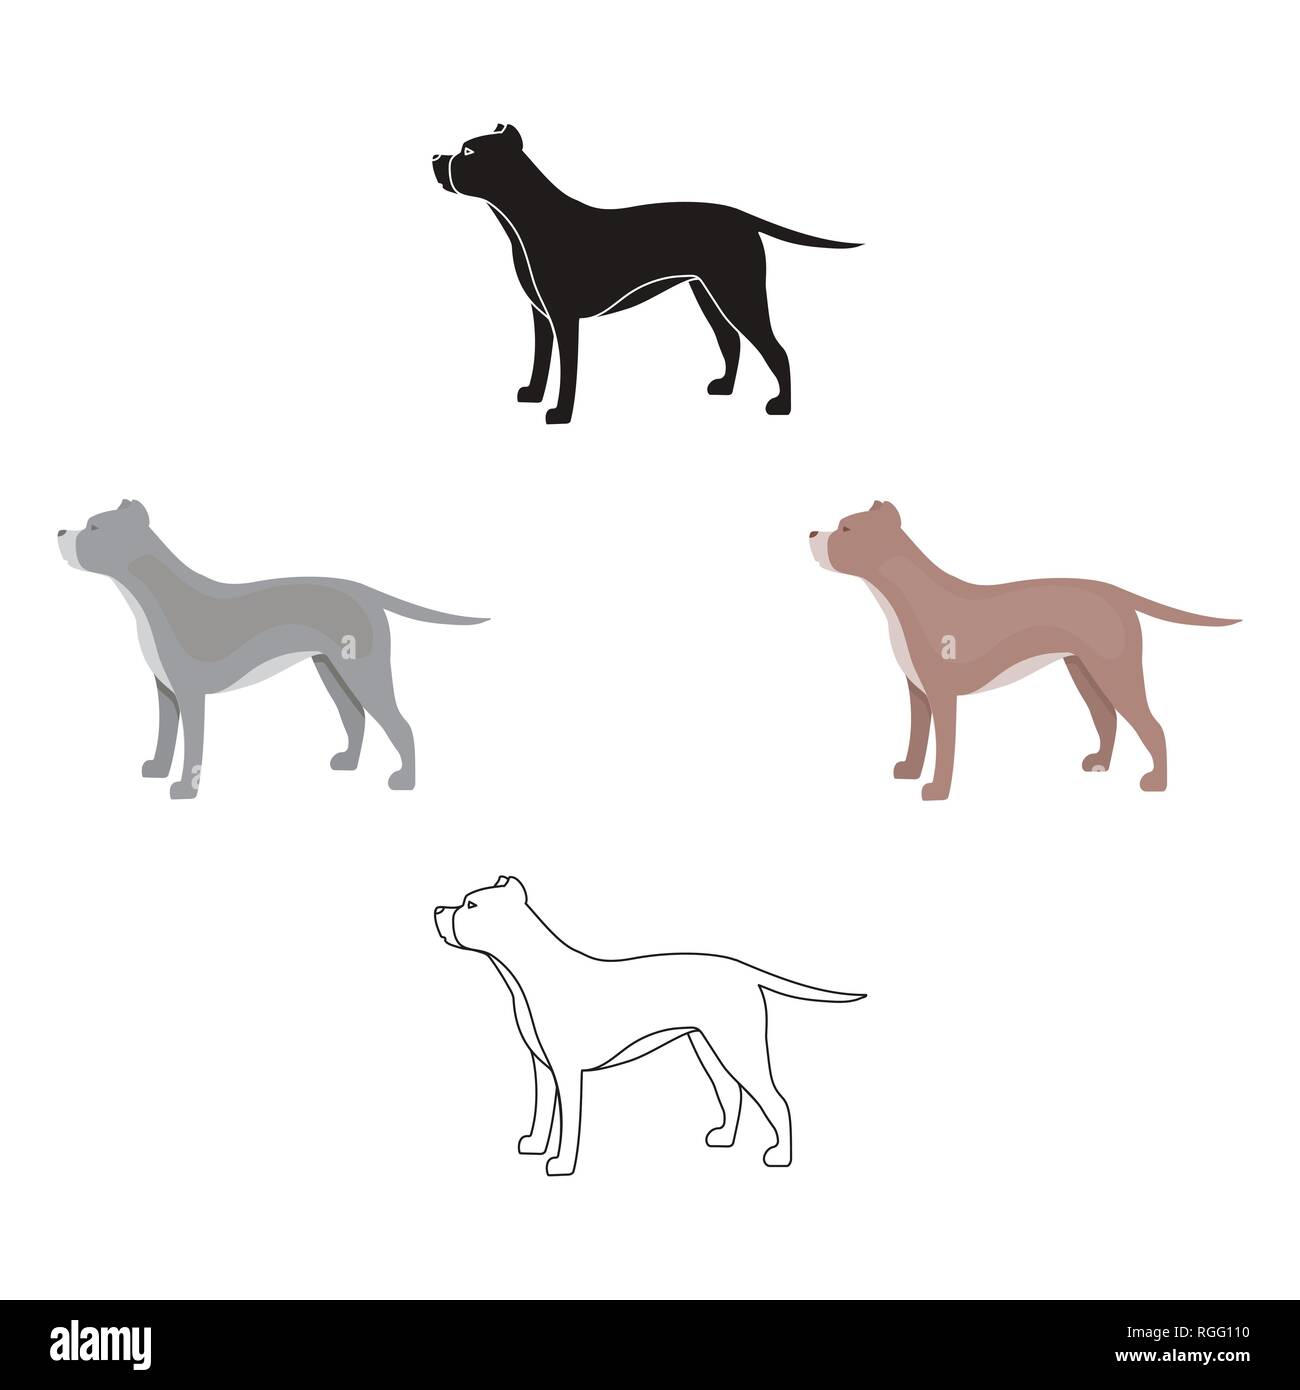 american,animal,art,breed,bull,canine,cartoon,danger,dog,drawing ,face,fur,graphic,gray,guard,head,icon,illustration,isolated,logo,muscle,nature,pet,pit, pitbull,portrait,snout,sport,staffordshire,strong,symbol,terrier,vector,view,web,white,  Vector ...